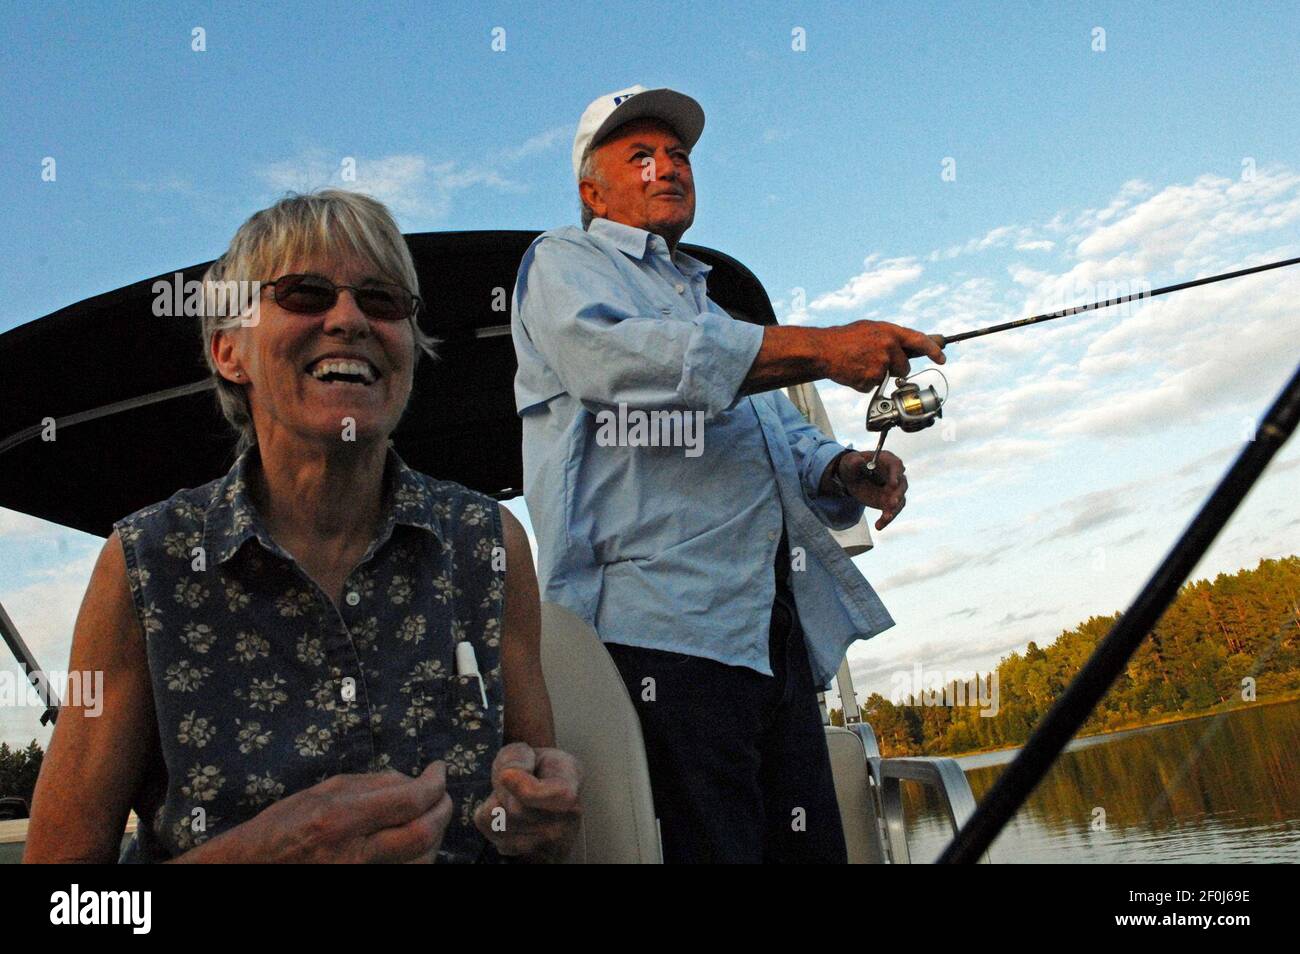 Pat Smith and Norb Berg fished for northerns, bass and panfish on Bud Grant&apos;s property in northwest Wisconsin. (Photo by Dennis Anderson/Minneapolis Star Tribune/MCT/Sipa USA) Stock Photo